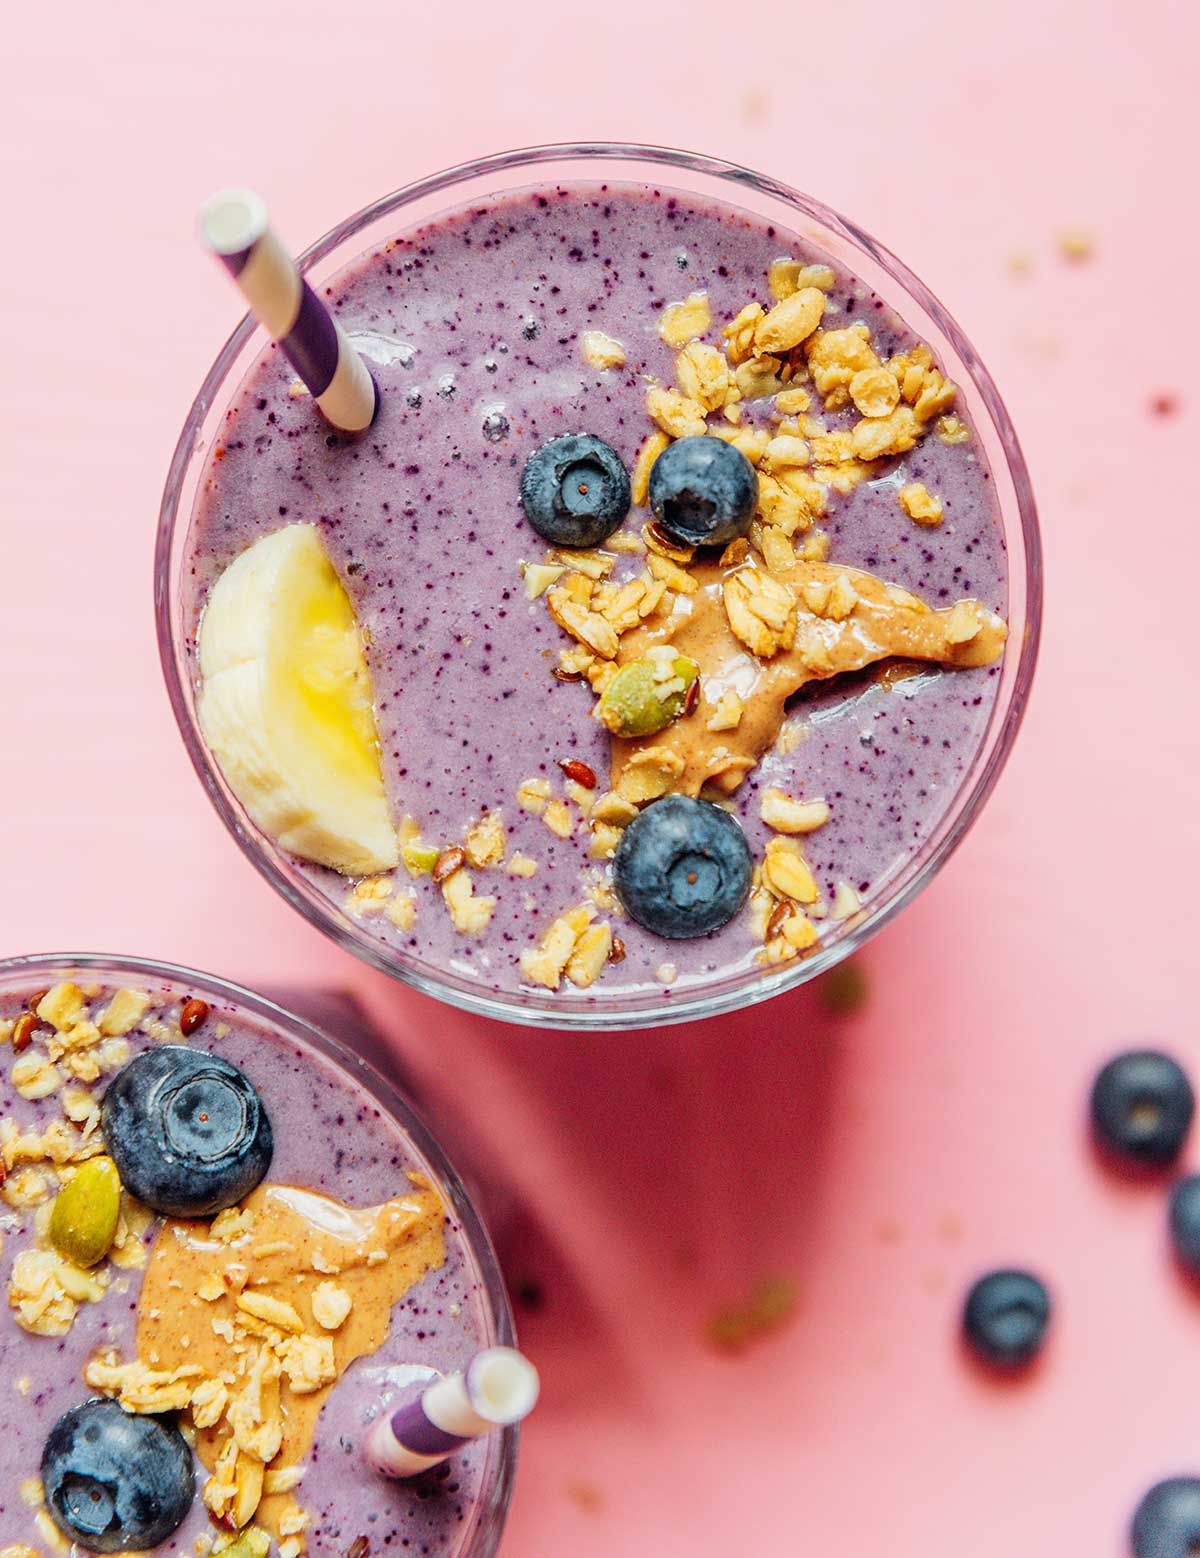 A glass filled with blueberry banana smoothie and topped with nut butter, granola, blueberries, and a banana slice